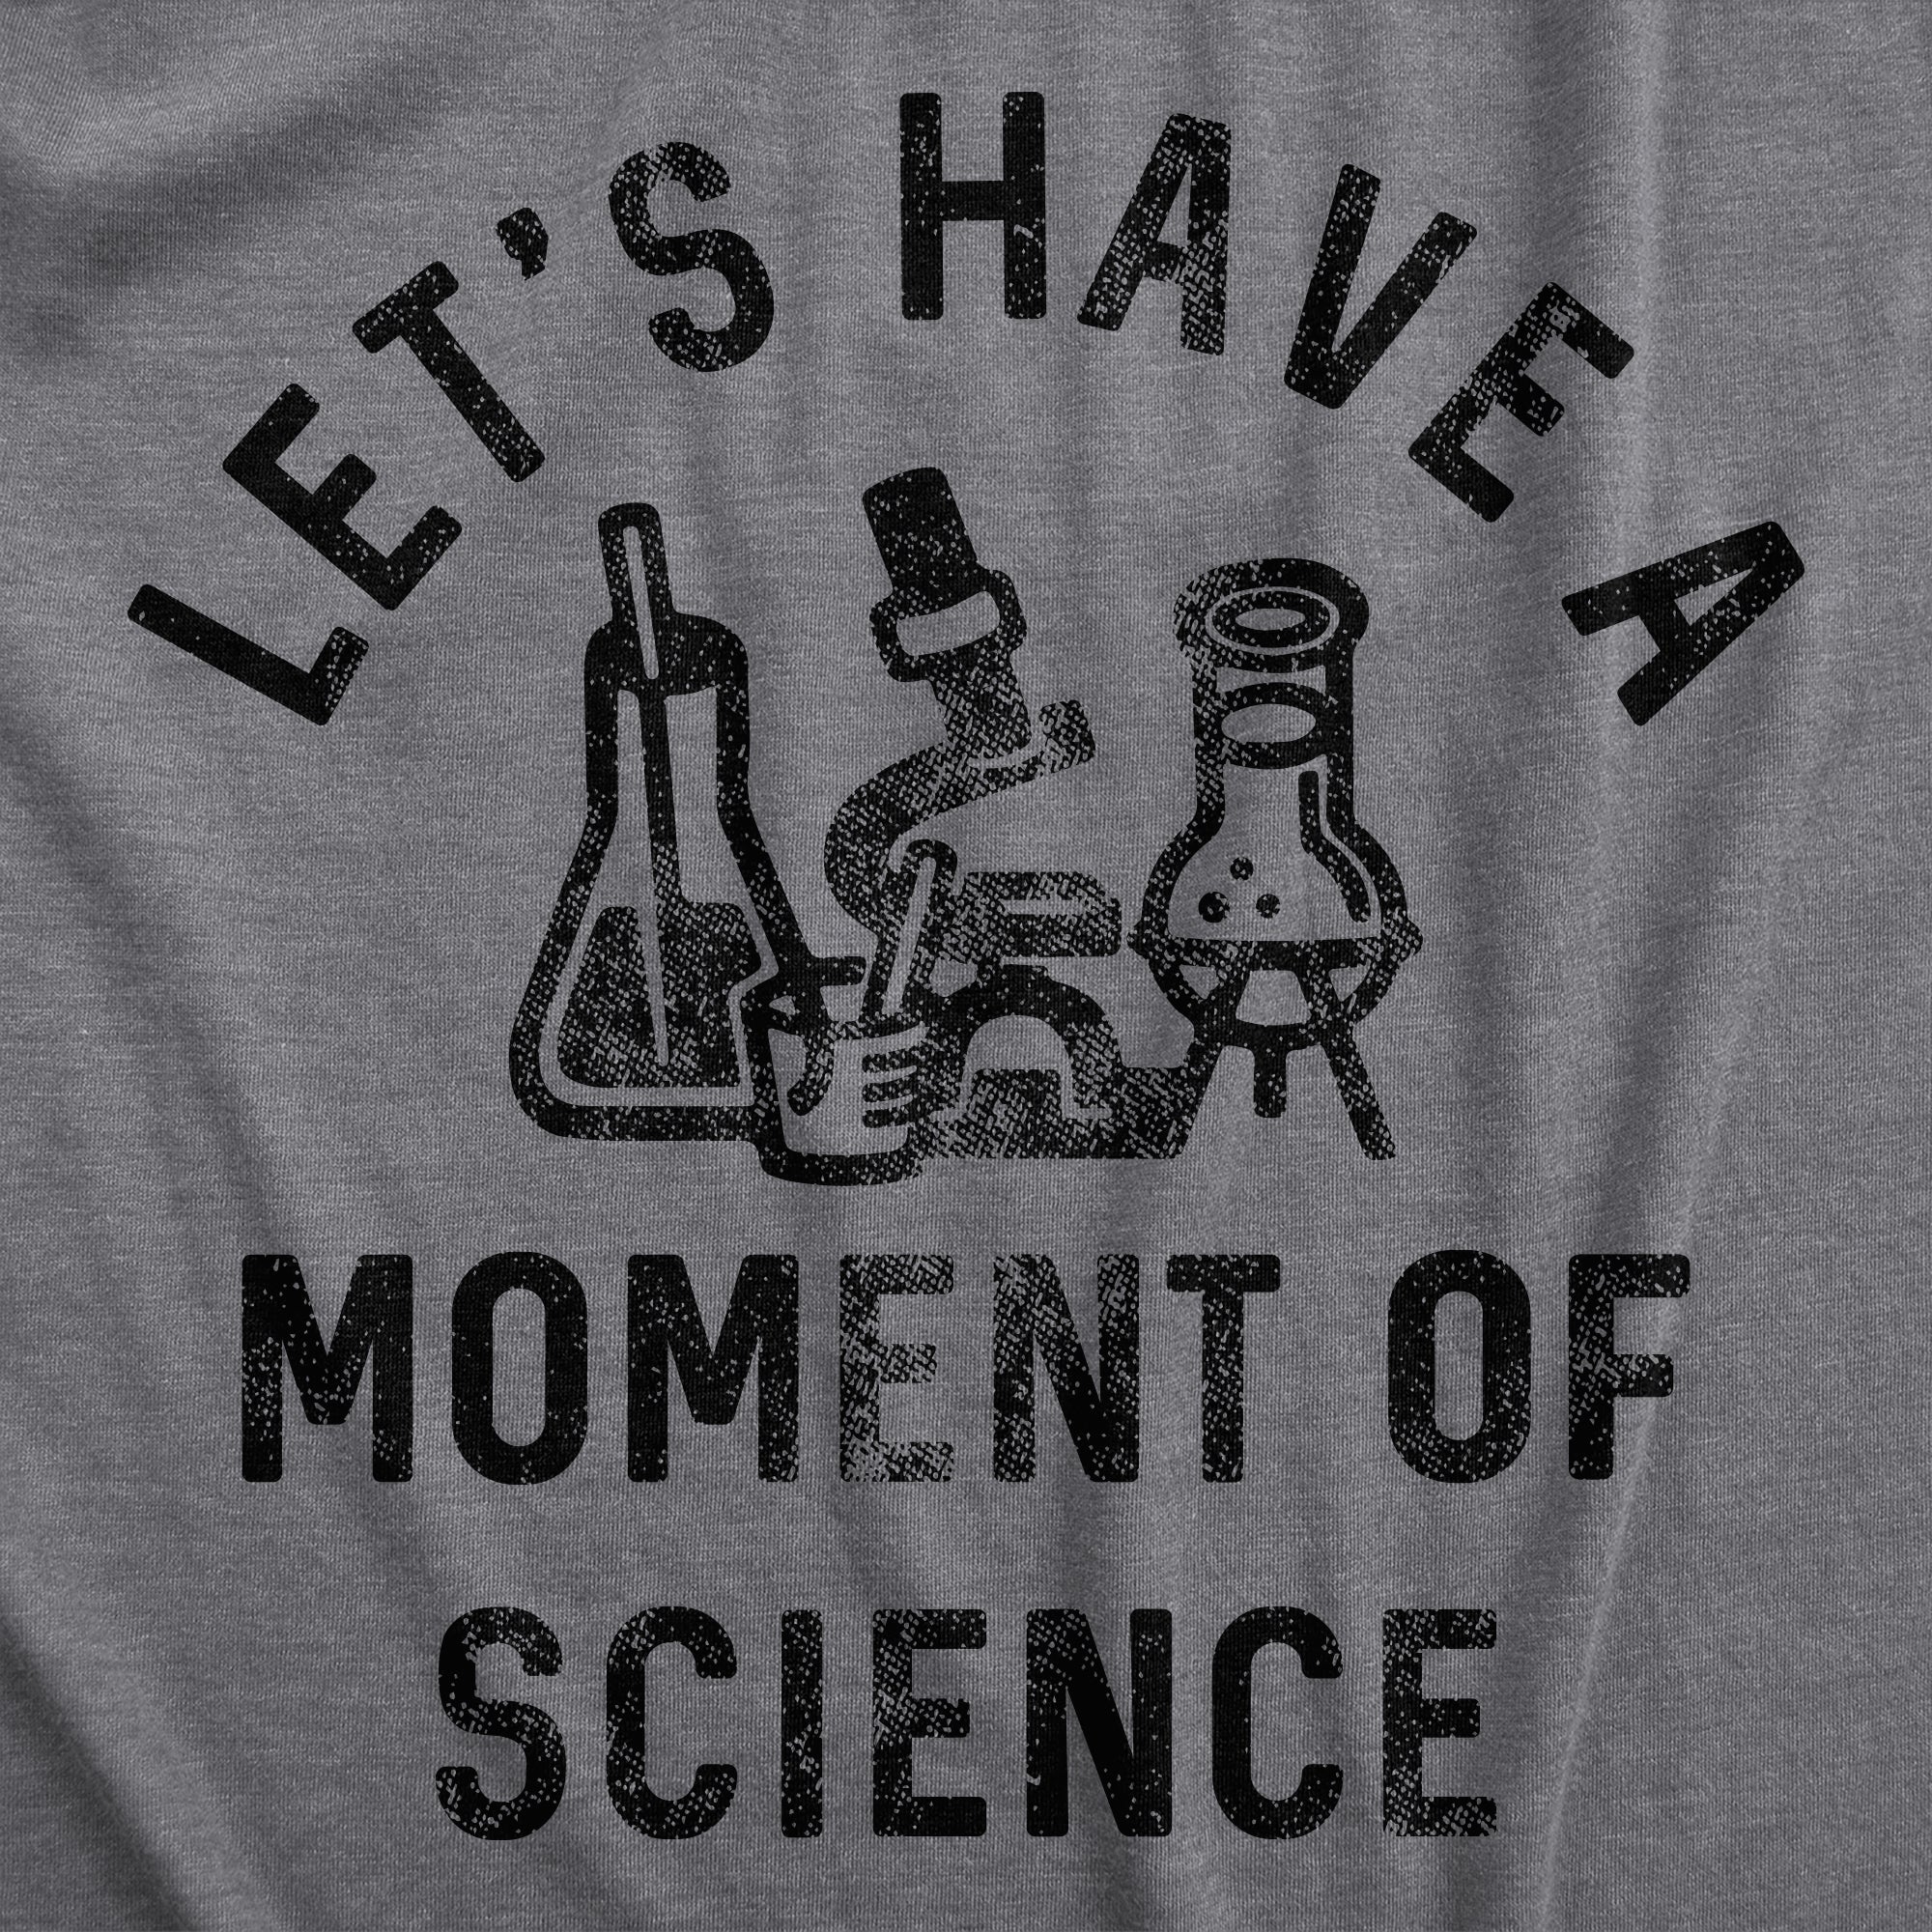 Funny Dark Heather Grey - SCIENCE Lets Have A Moment Of Science Womens T Shirt Nerdy Science sarcastic Tee